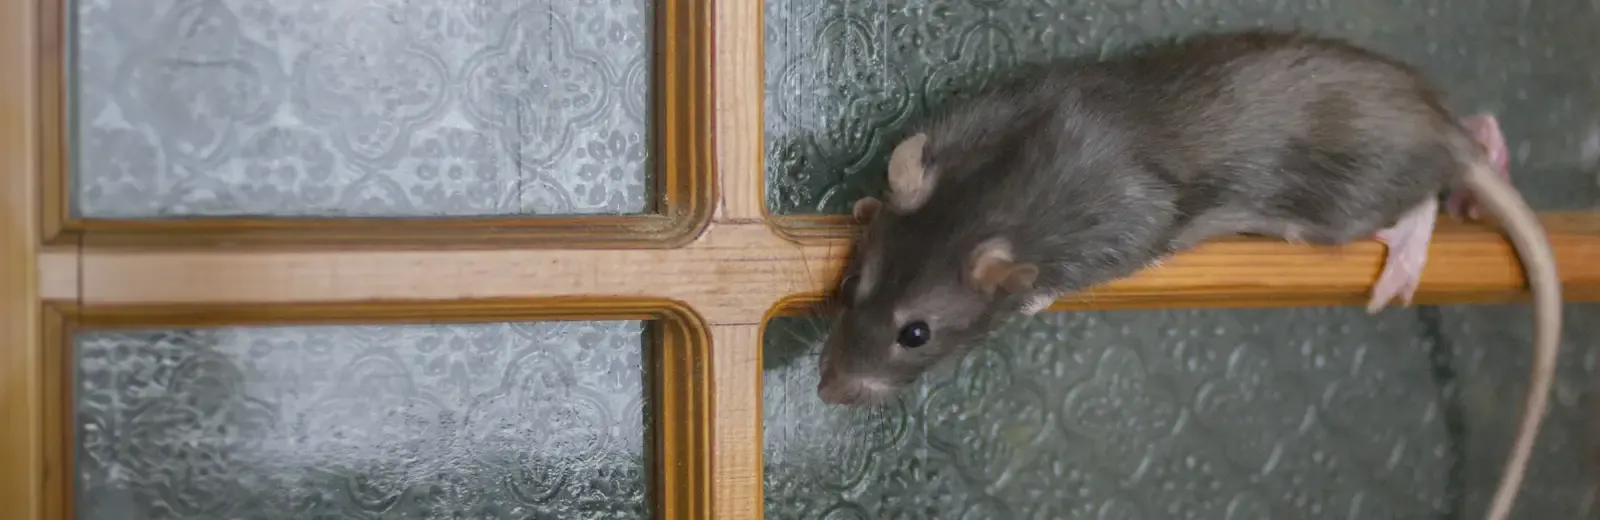 mouse crawling on door